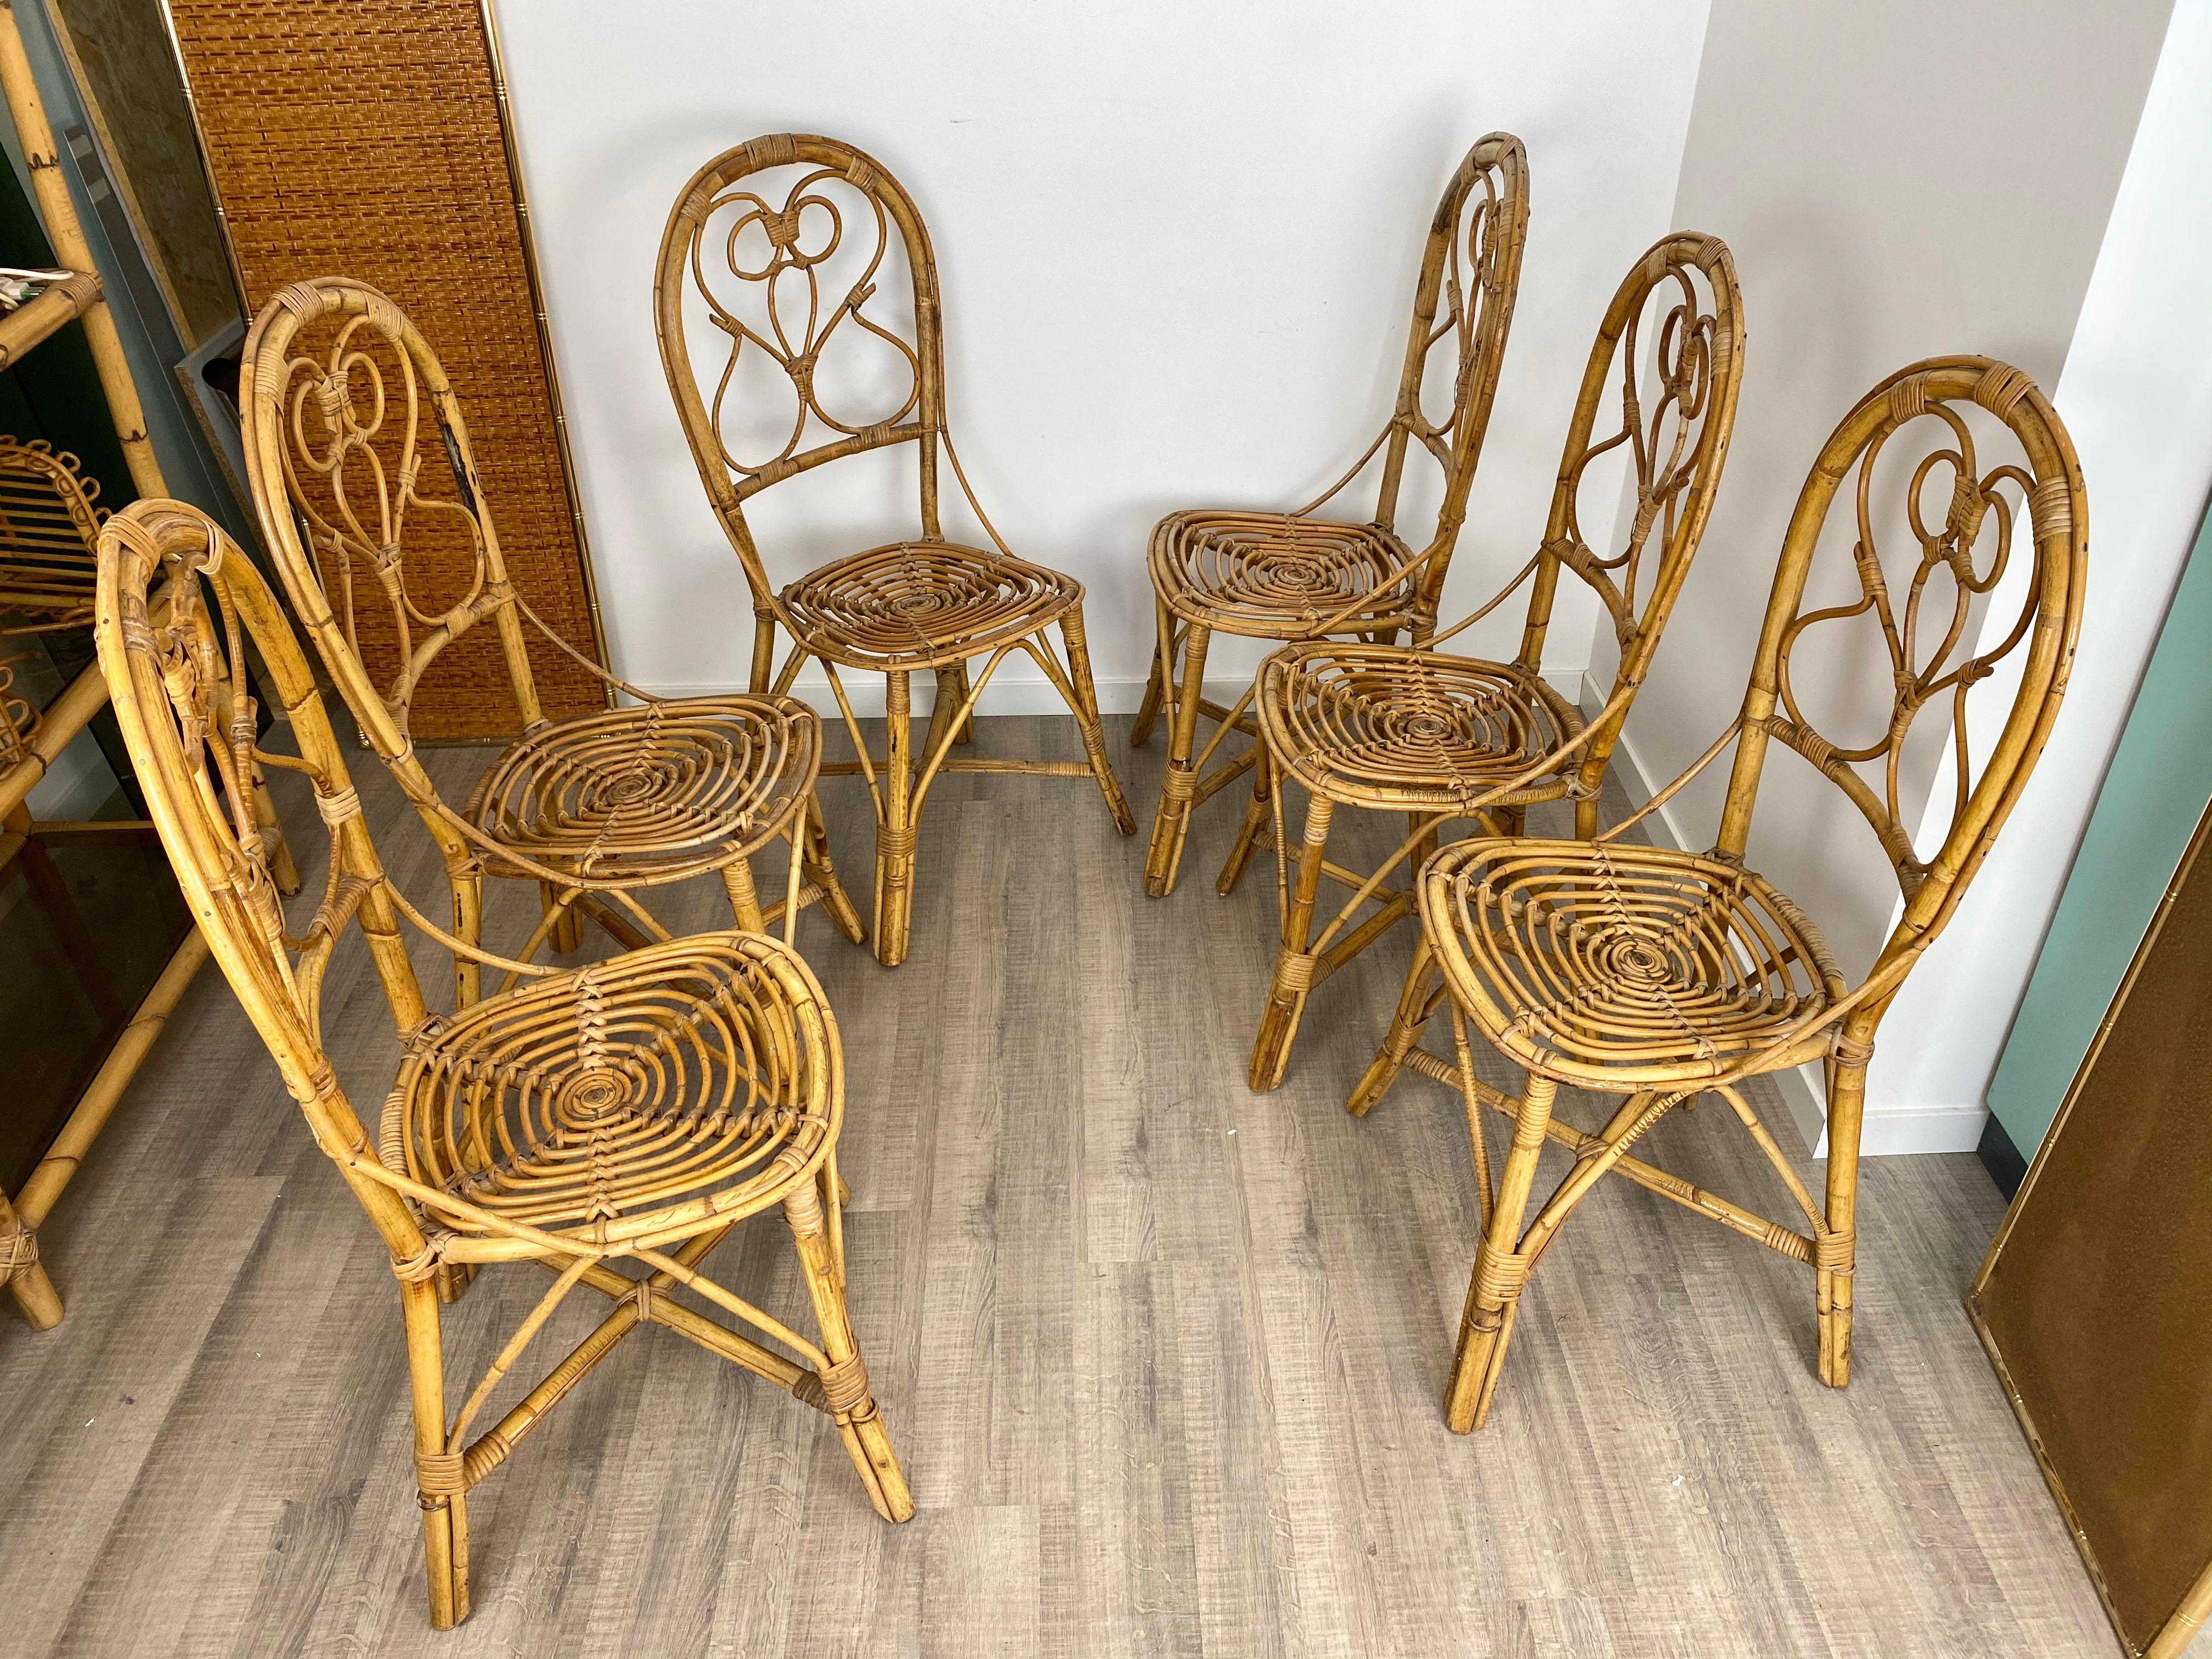 Six chairs made in rattan and bamboo. Made in Italy, 1960s.